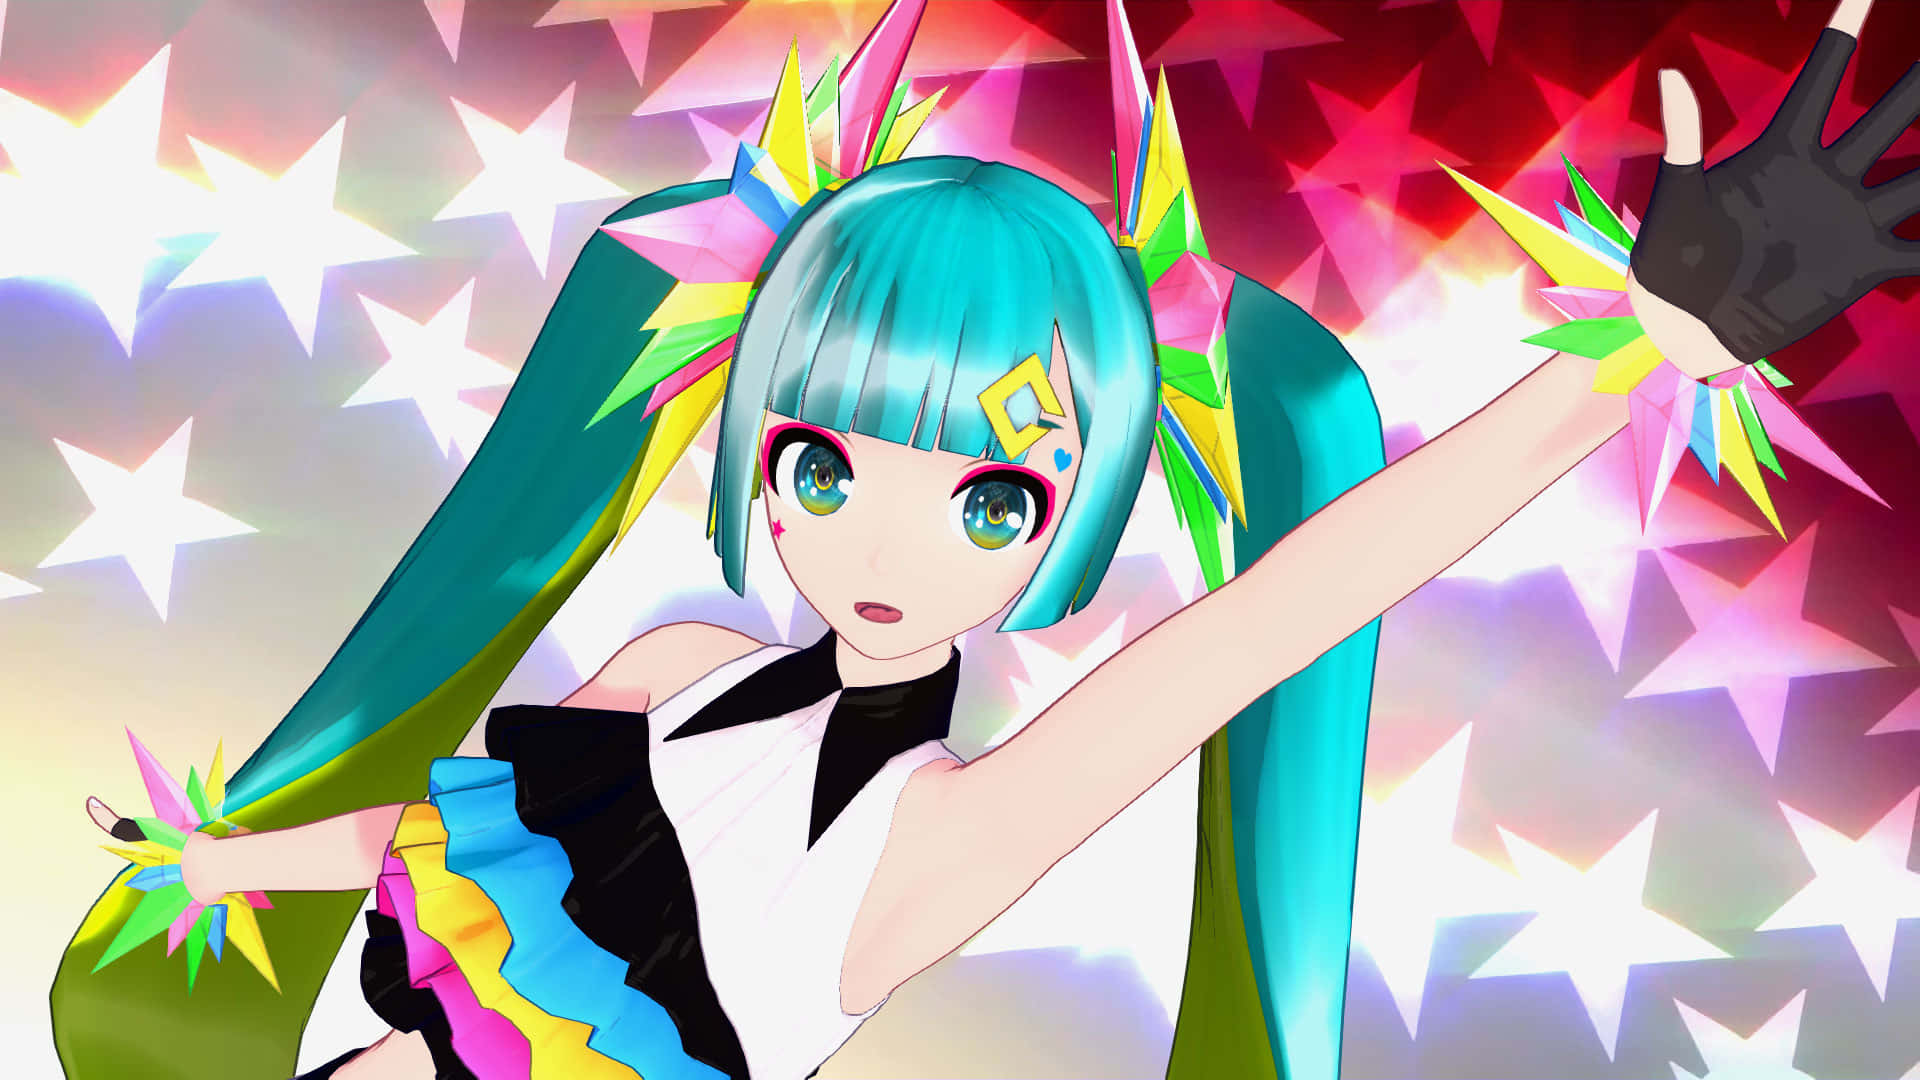 A colorful rendering of Hatsune Miku against a galactic backdrop